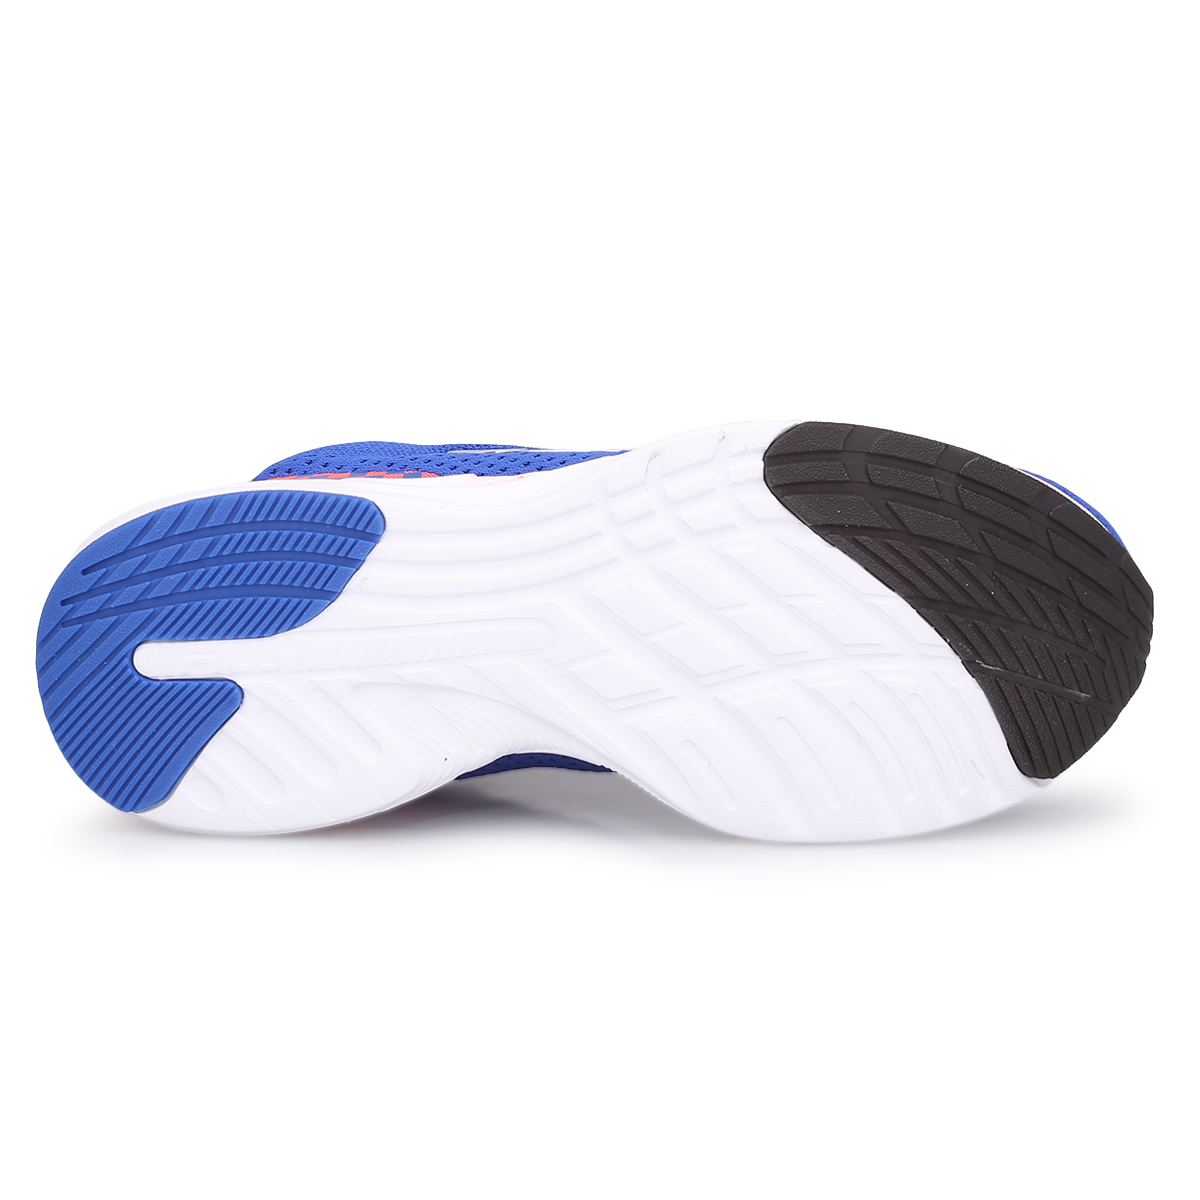 Zapatillas Fila Racer One,  image number null